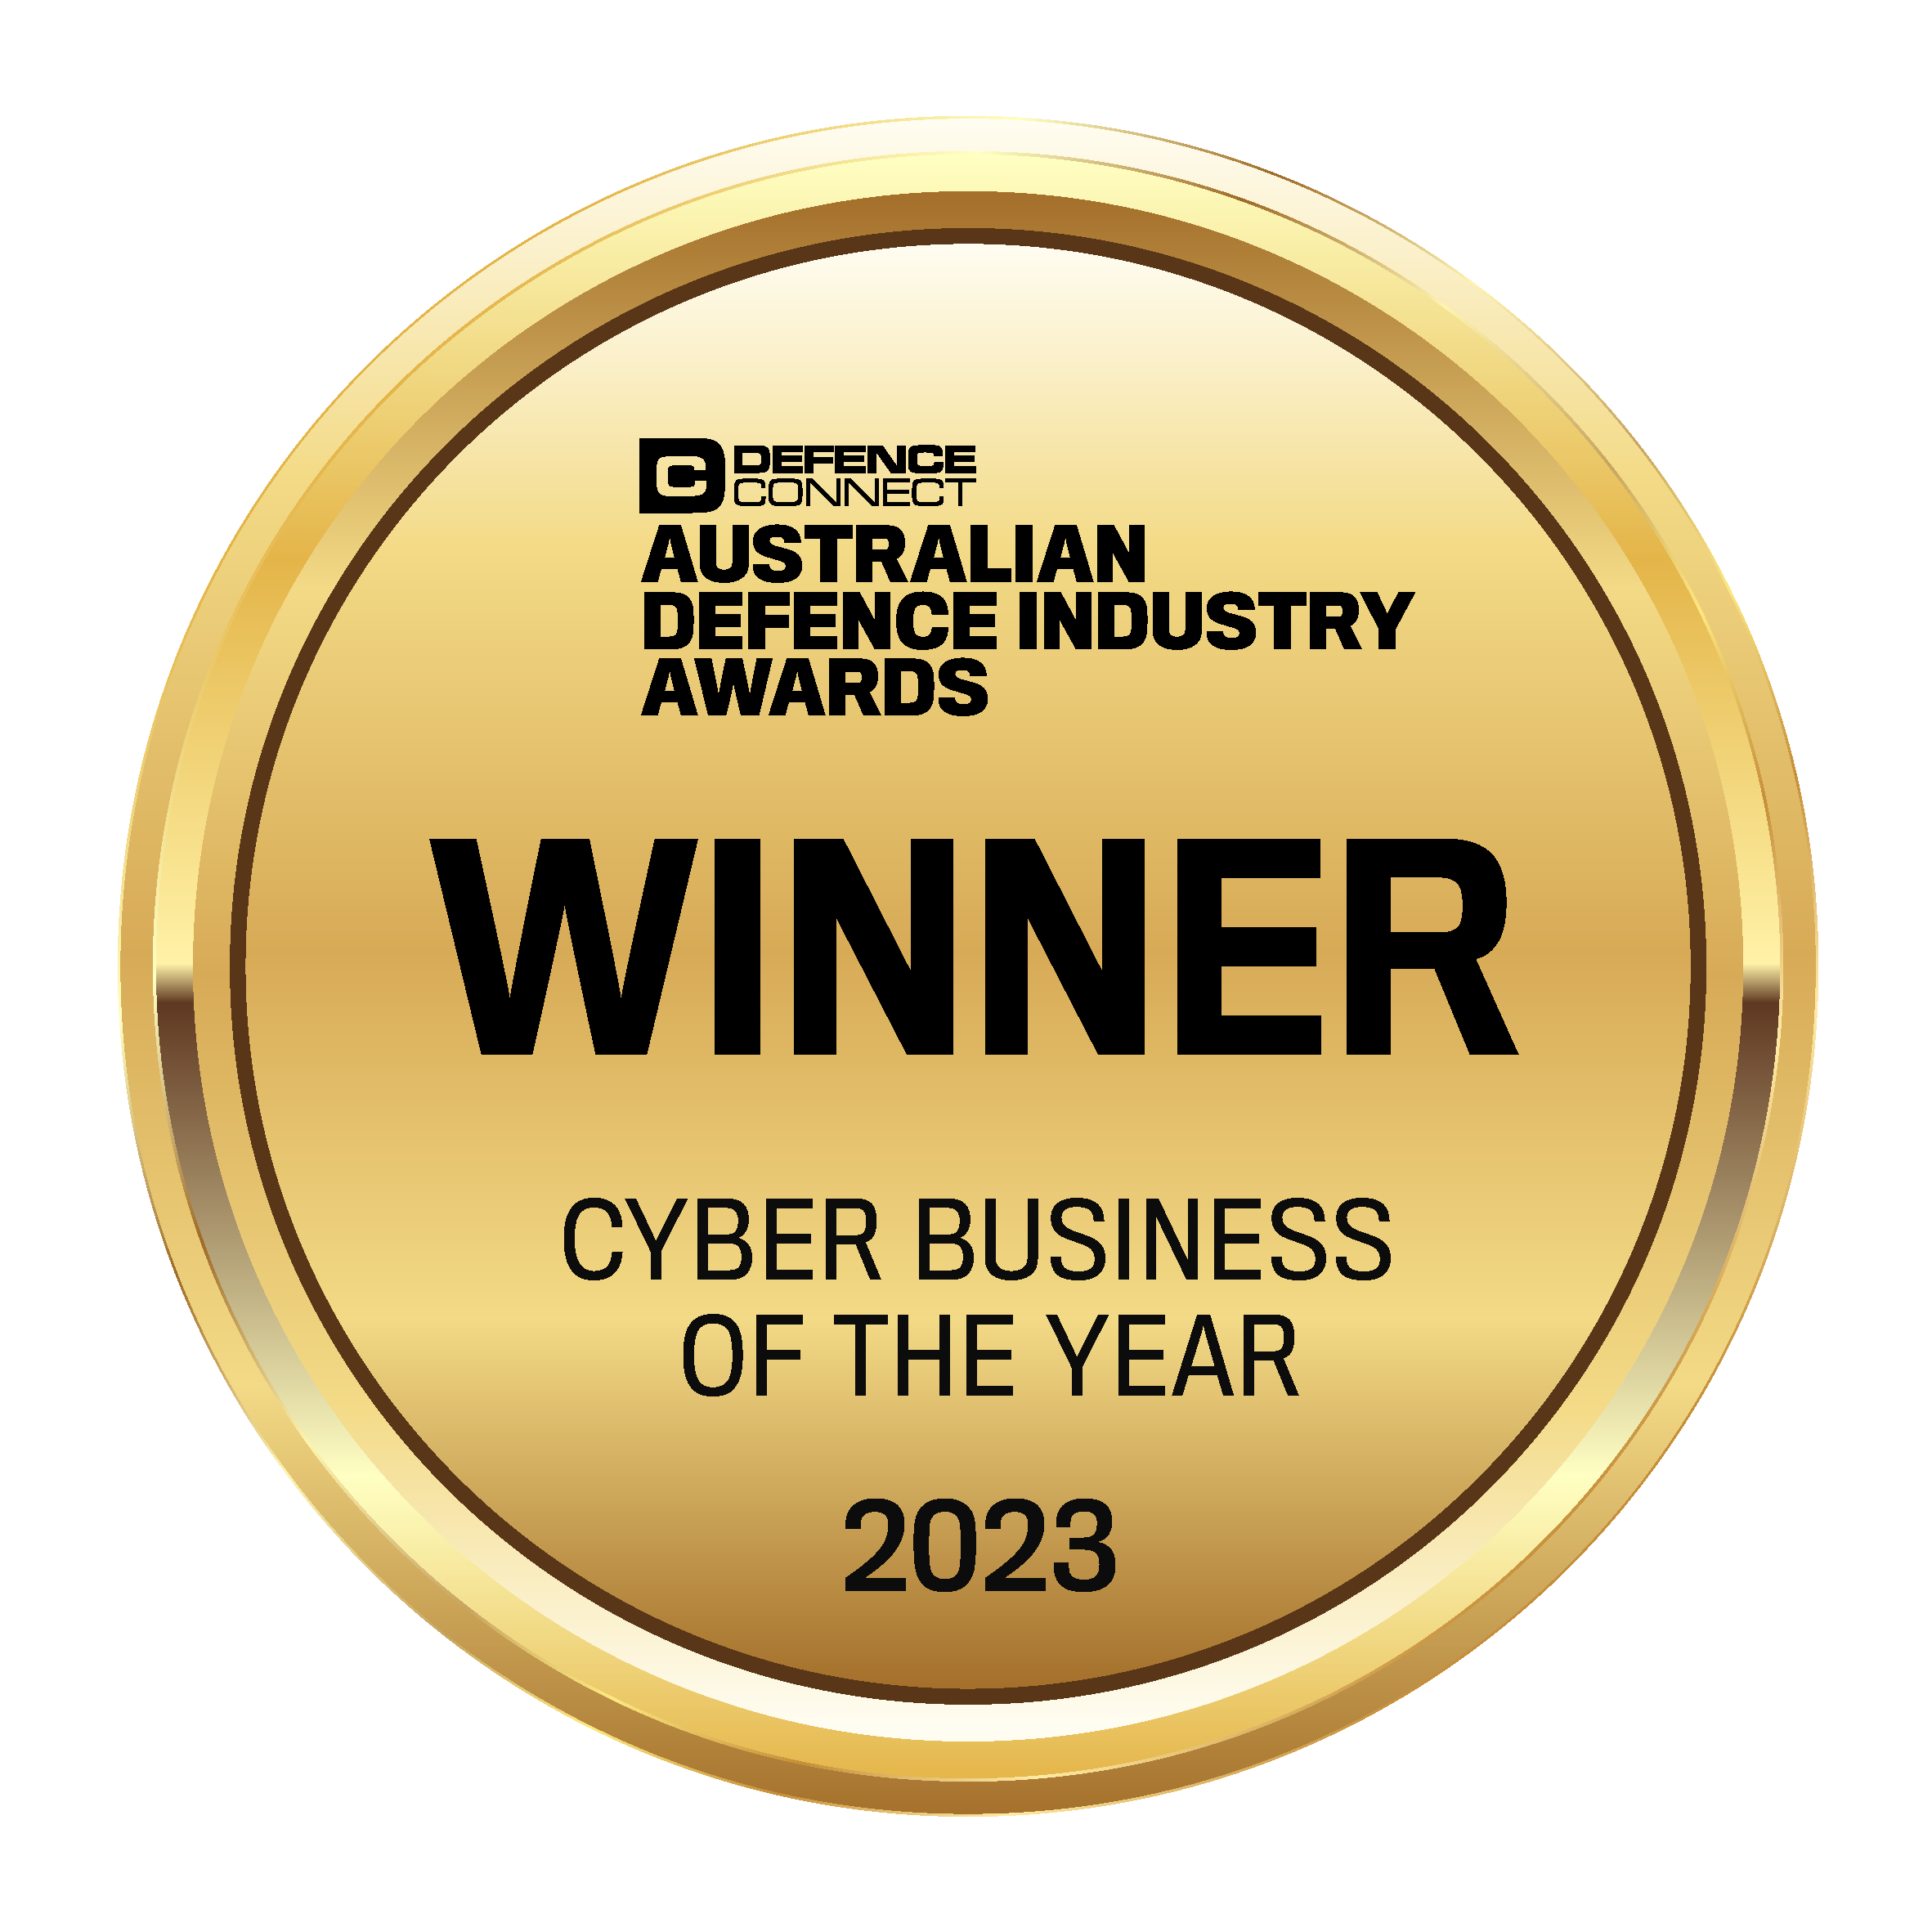 Australian Defence Industry Awards 2023 Cyber Business of the Year